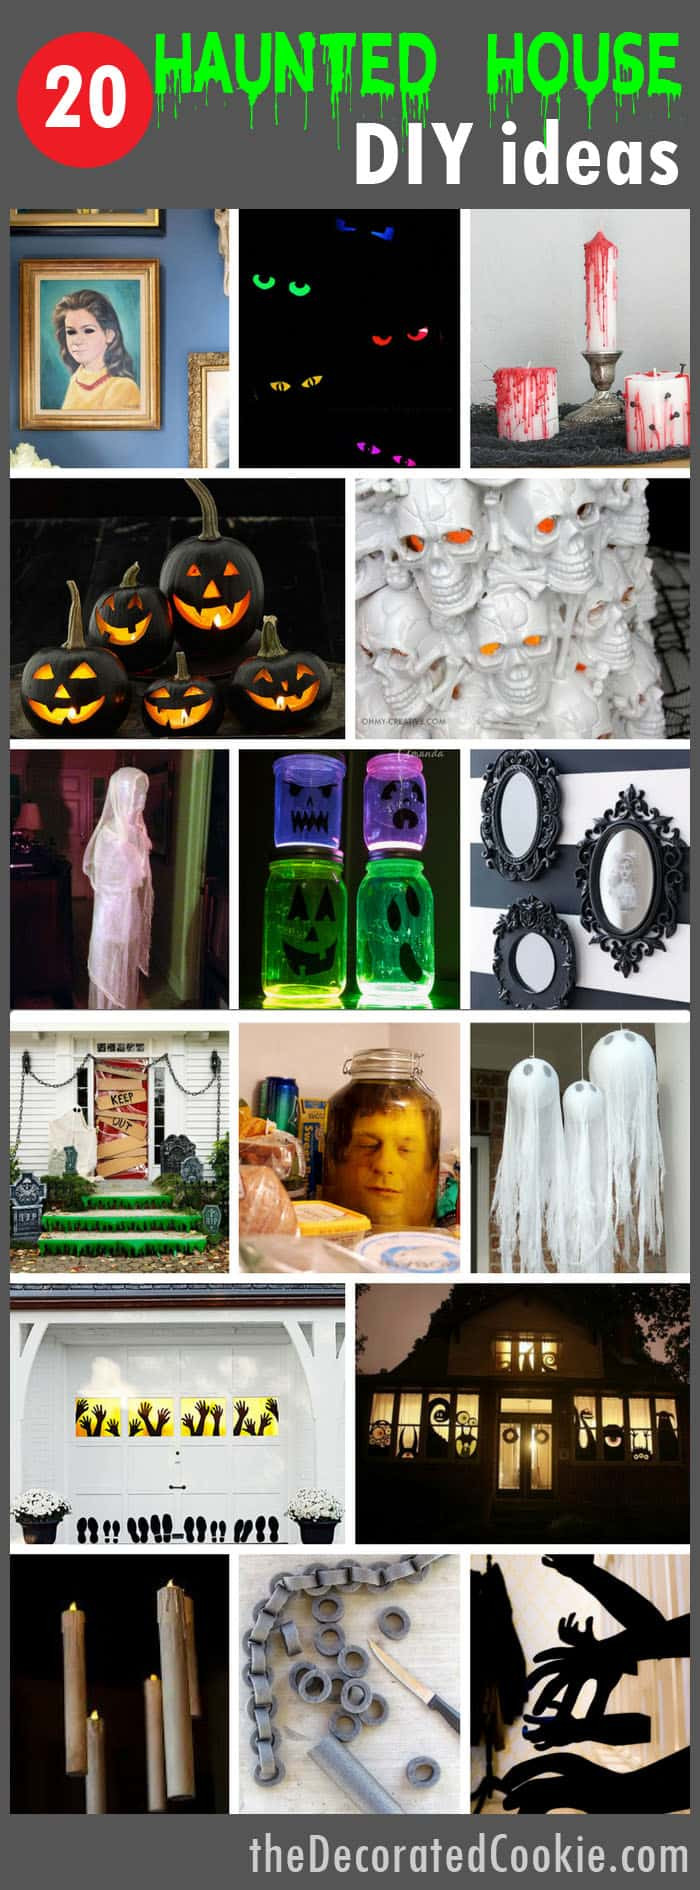 Haunted House Decorations DIY
 DIY haunted house ideas roundup ideas to host your own